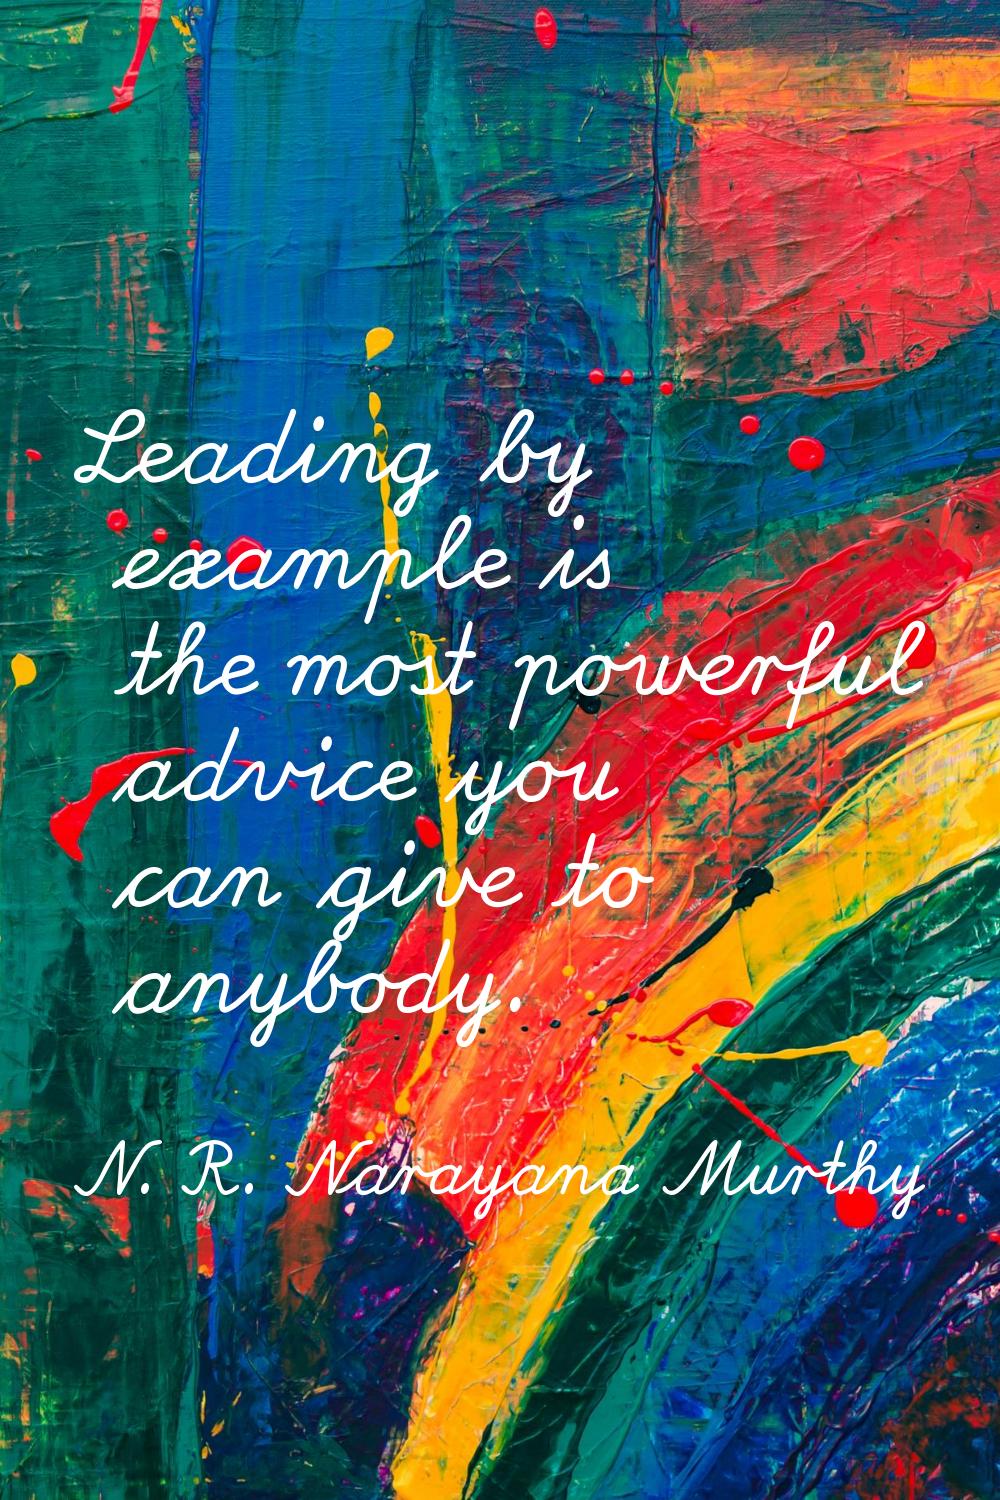 Leading by example is the most powerful advice you can give to anybody.